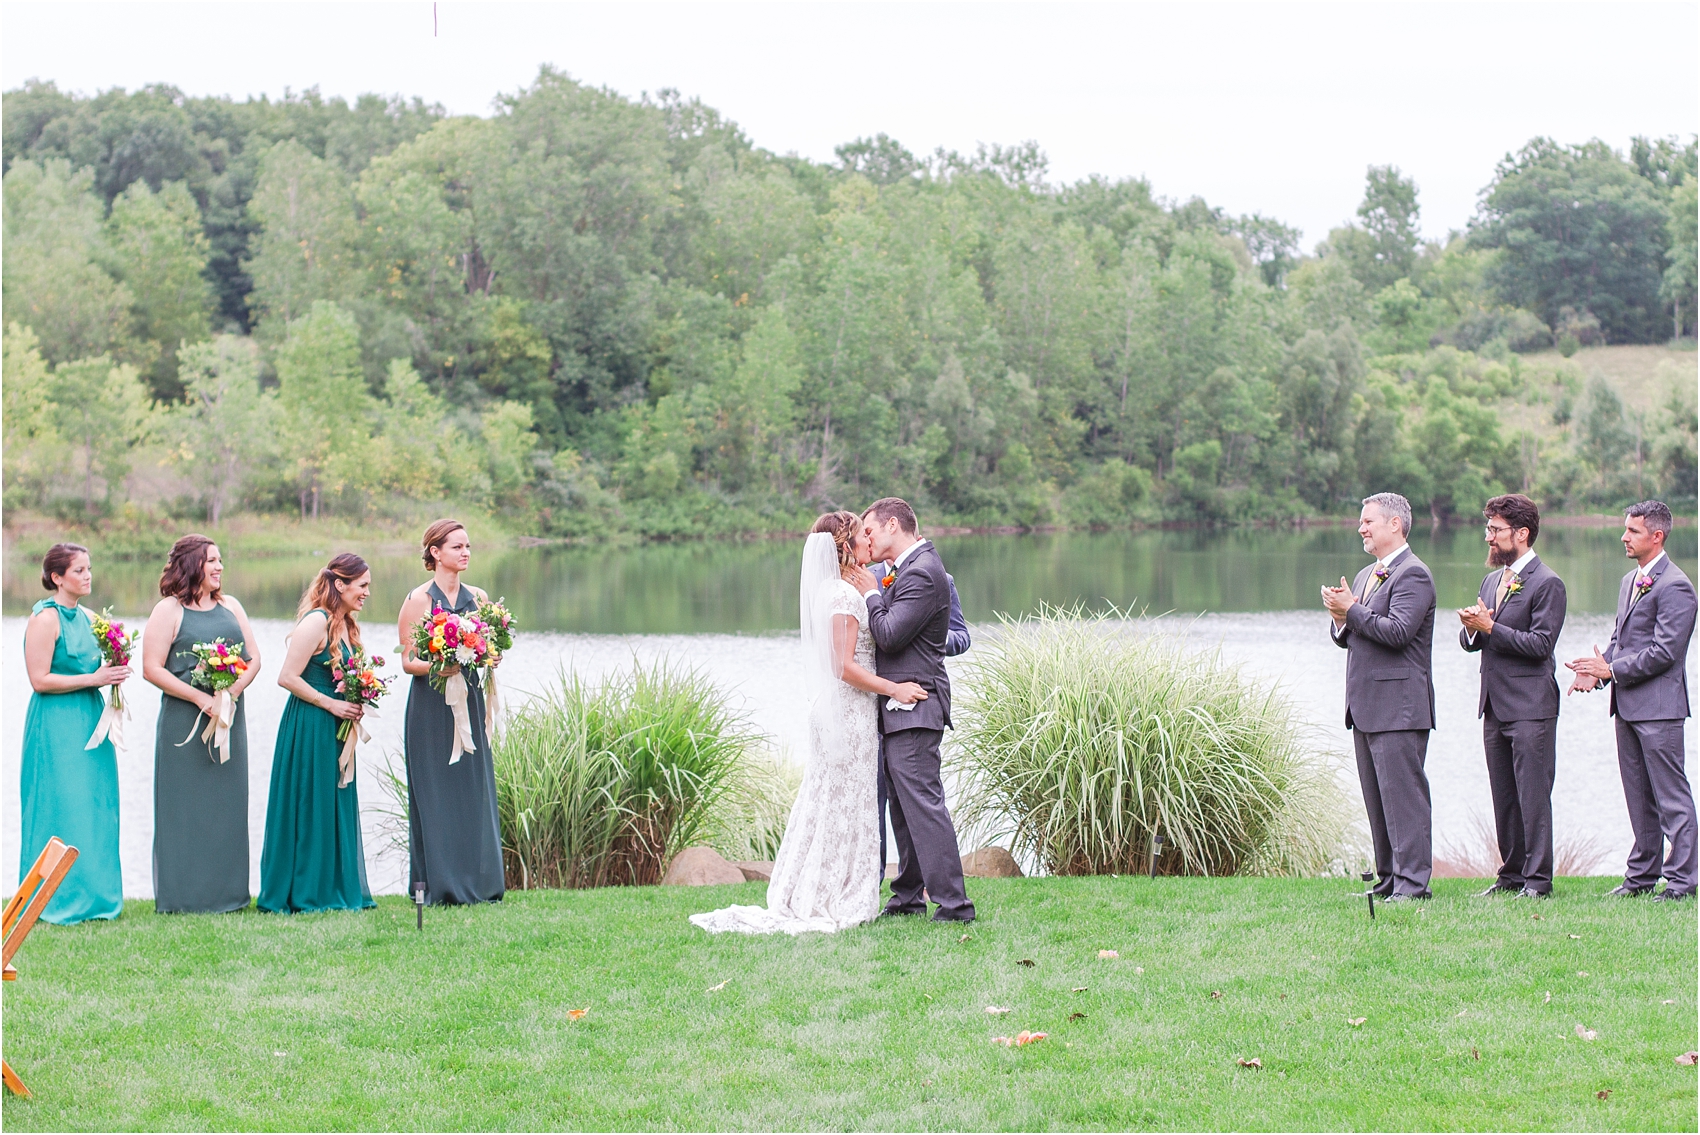 romantic-intimate-backyard-wedding-photos-at-private-estate-in-ann-arbor-mi-by-courtney-carolyn-photography_0109.jpg